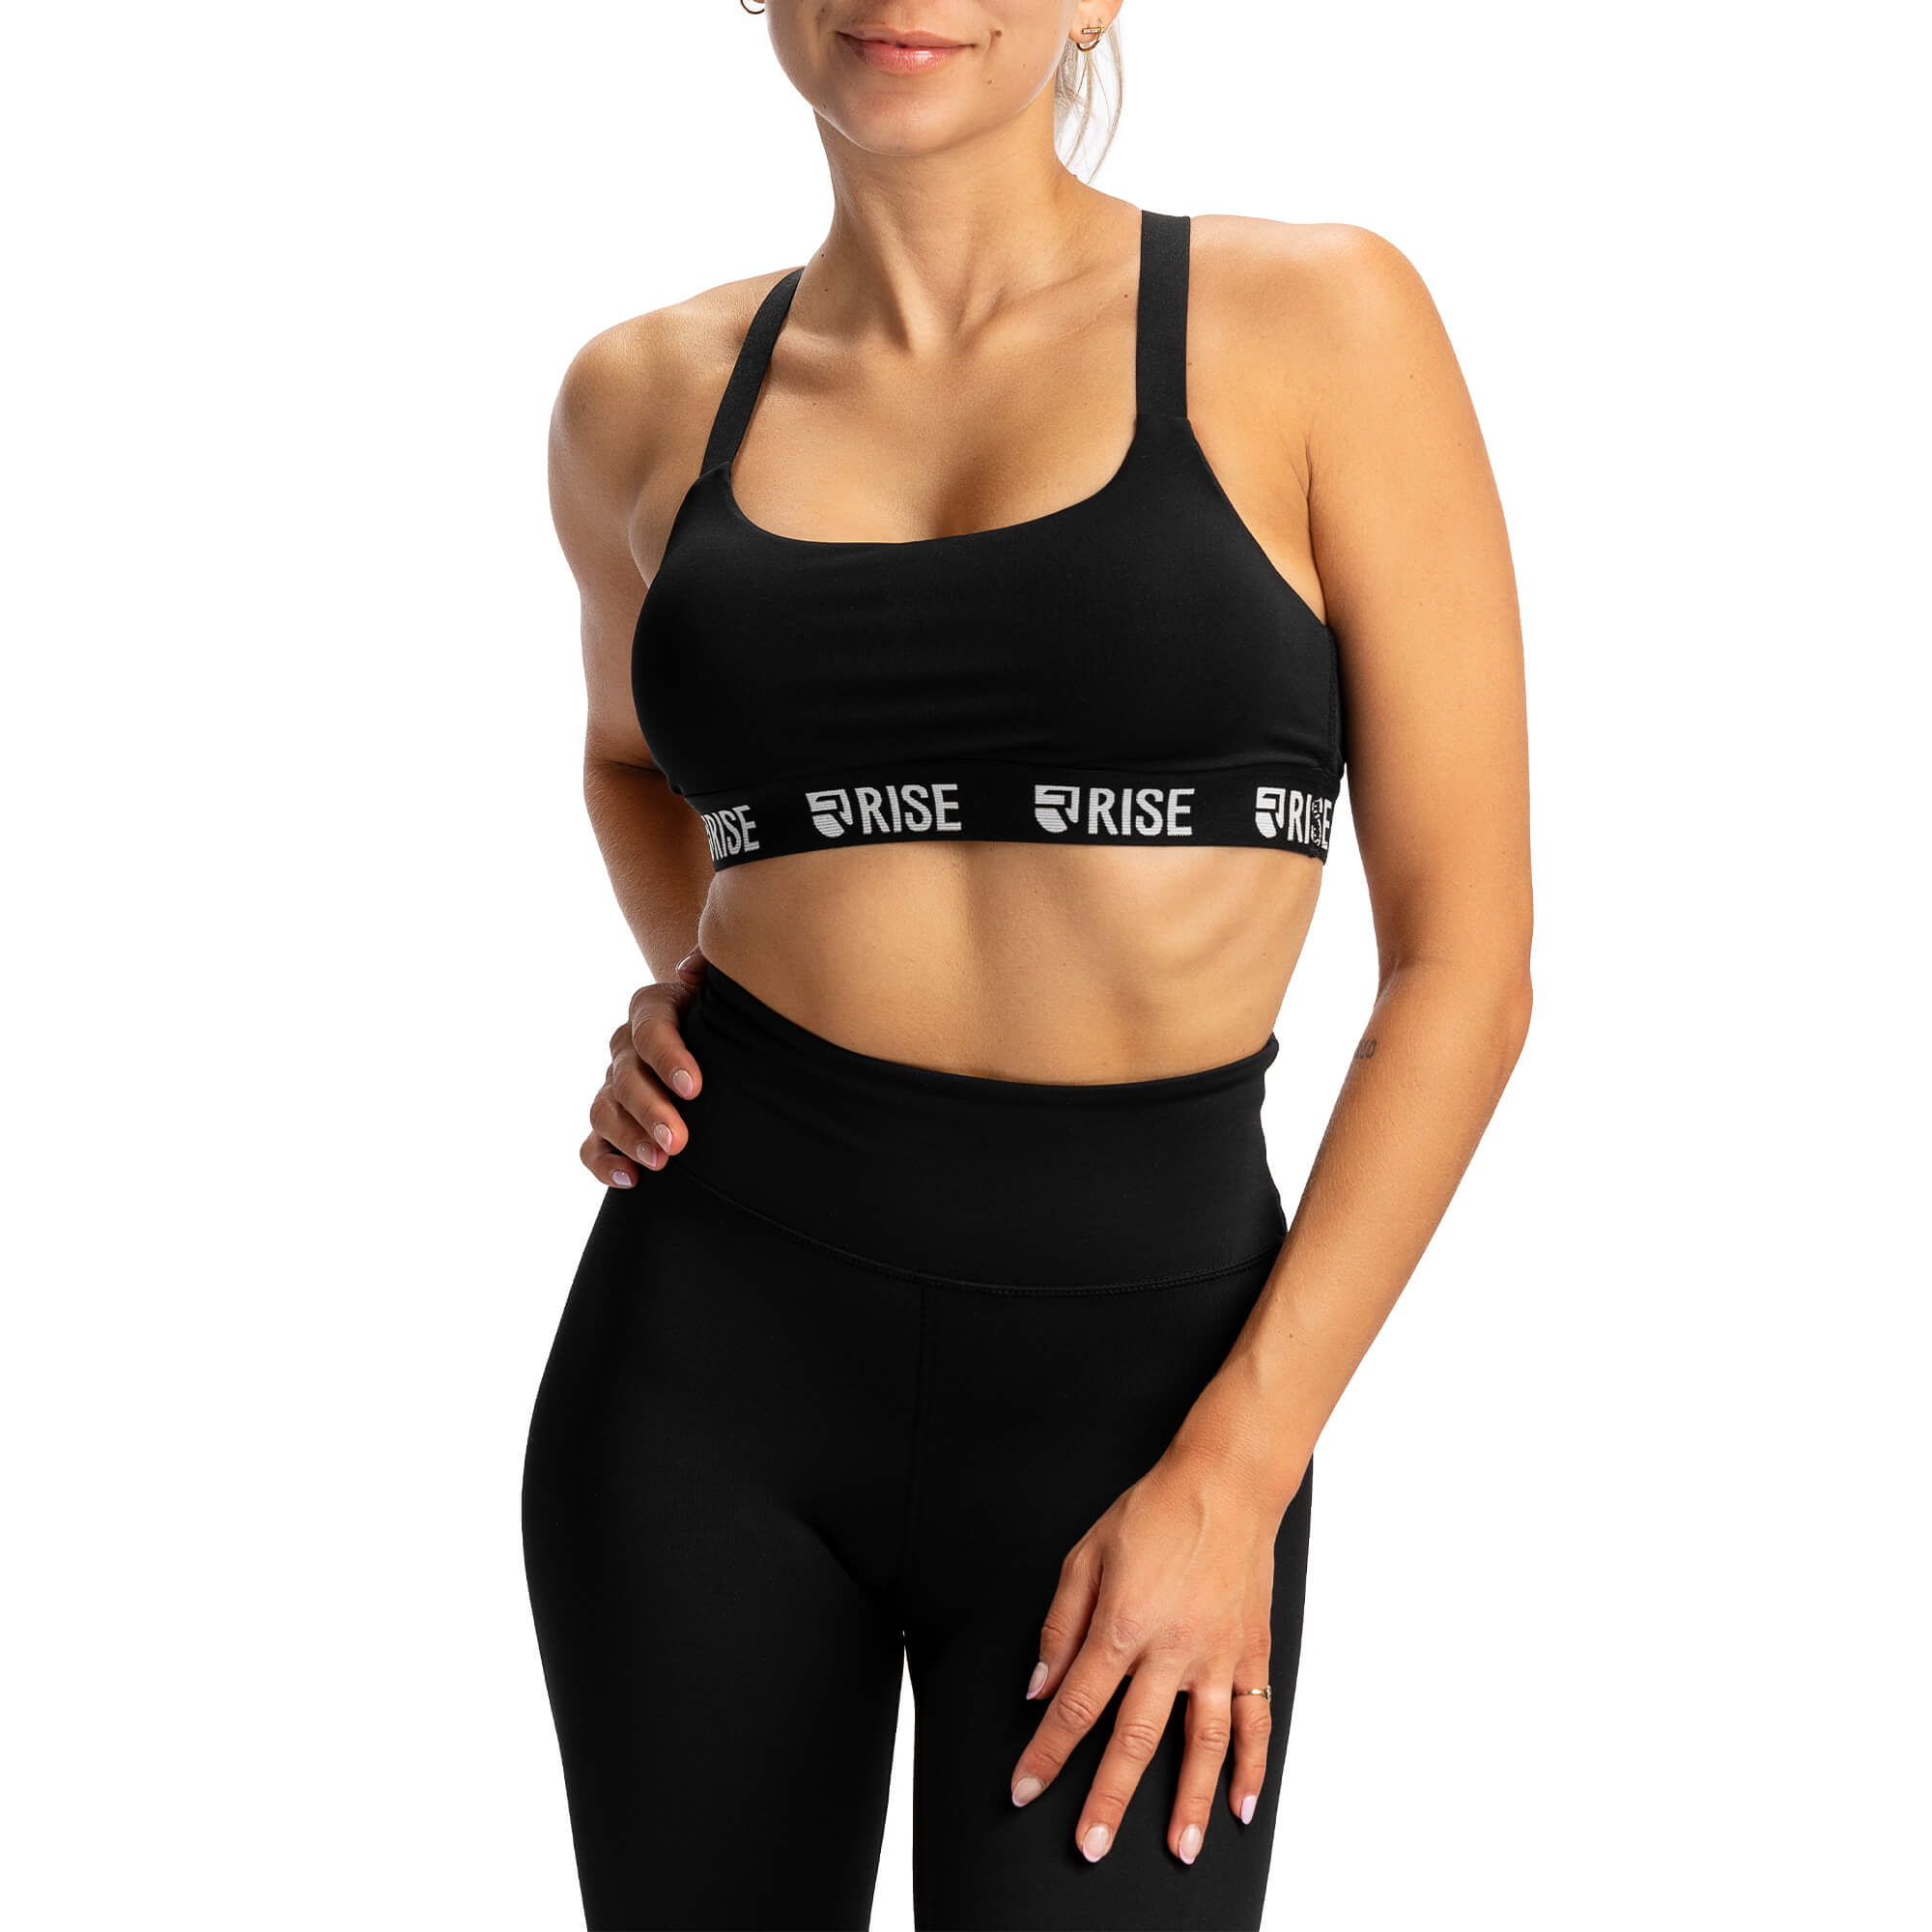 Dropship Ladies' All Sport Sports Bra - ROYAL/ WHITE - 2XL to Sell Online  at a Lower Price